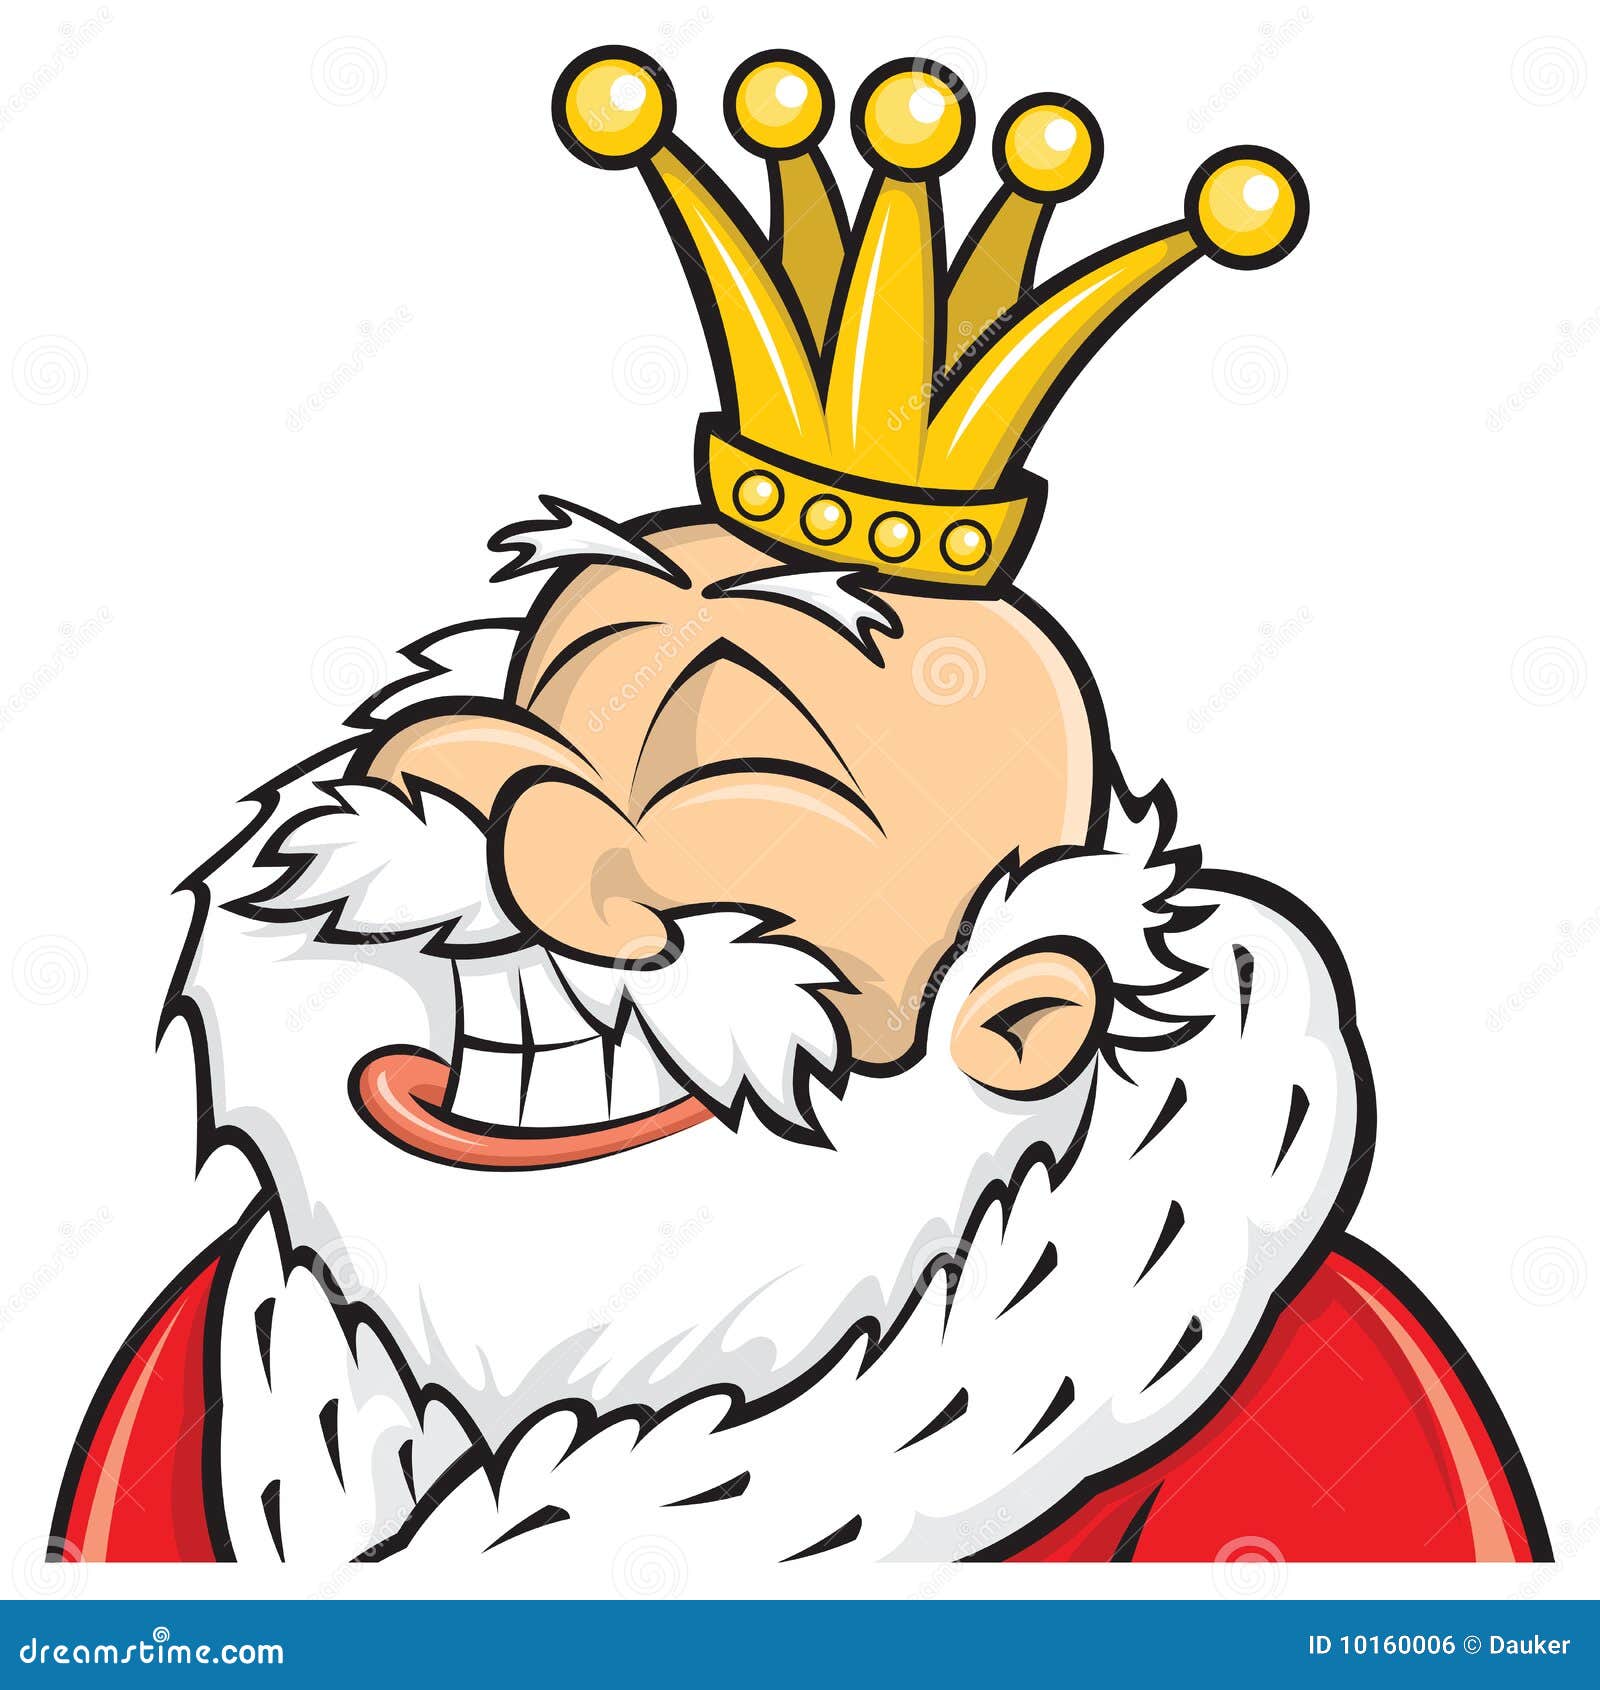 clipart mean king - photo #25